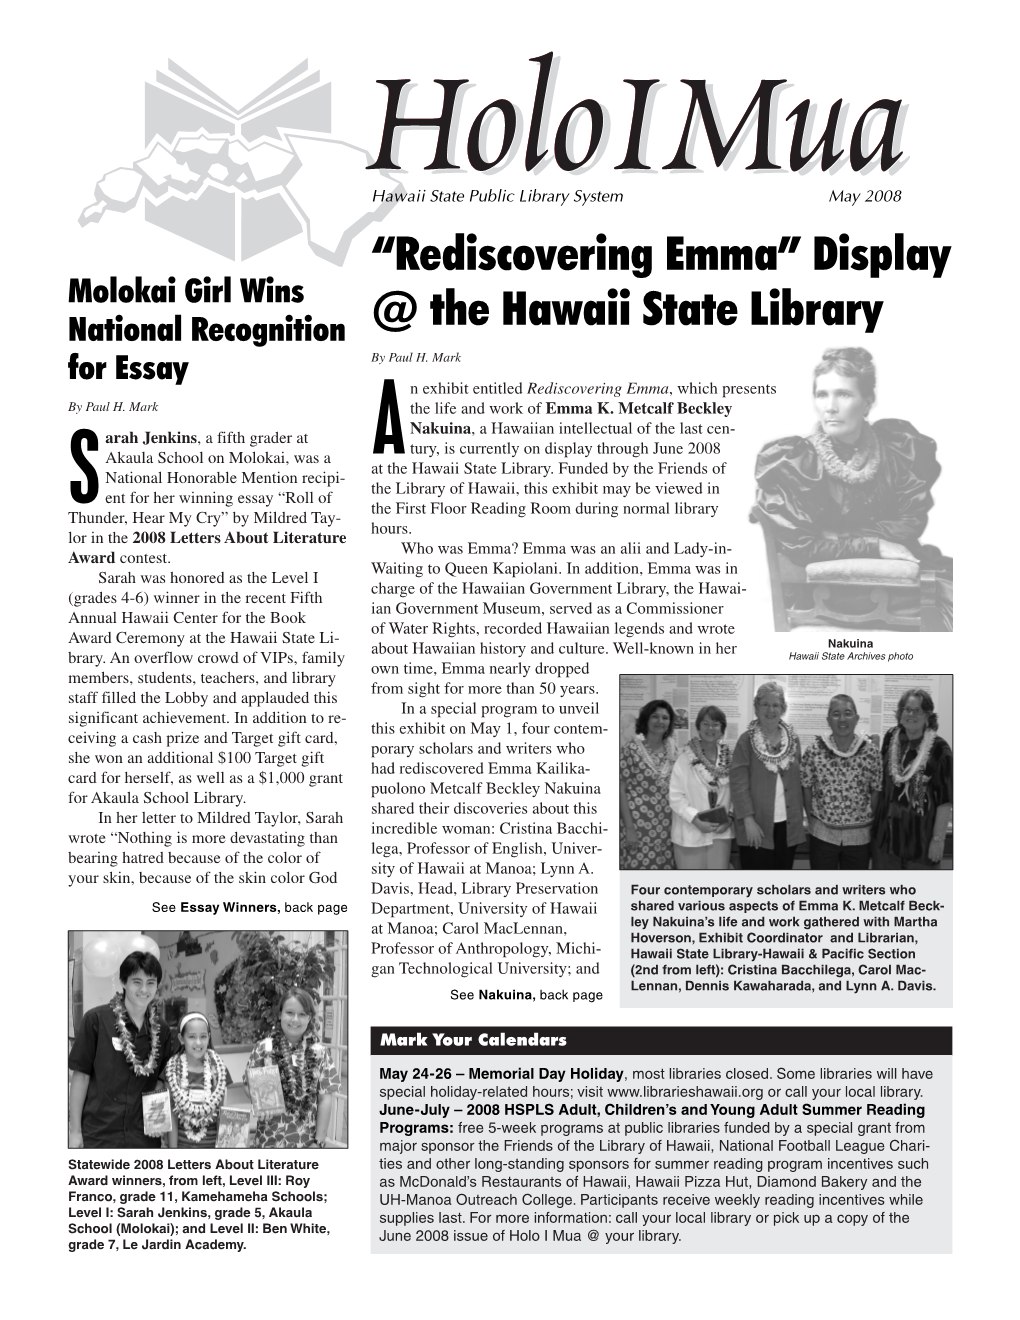 “Rediscovering Emma” Display @ the Hawaii State Library